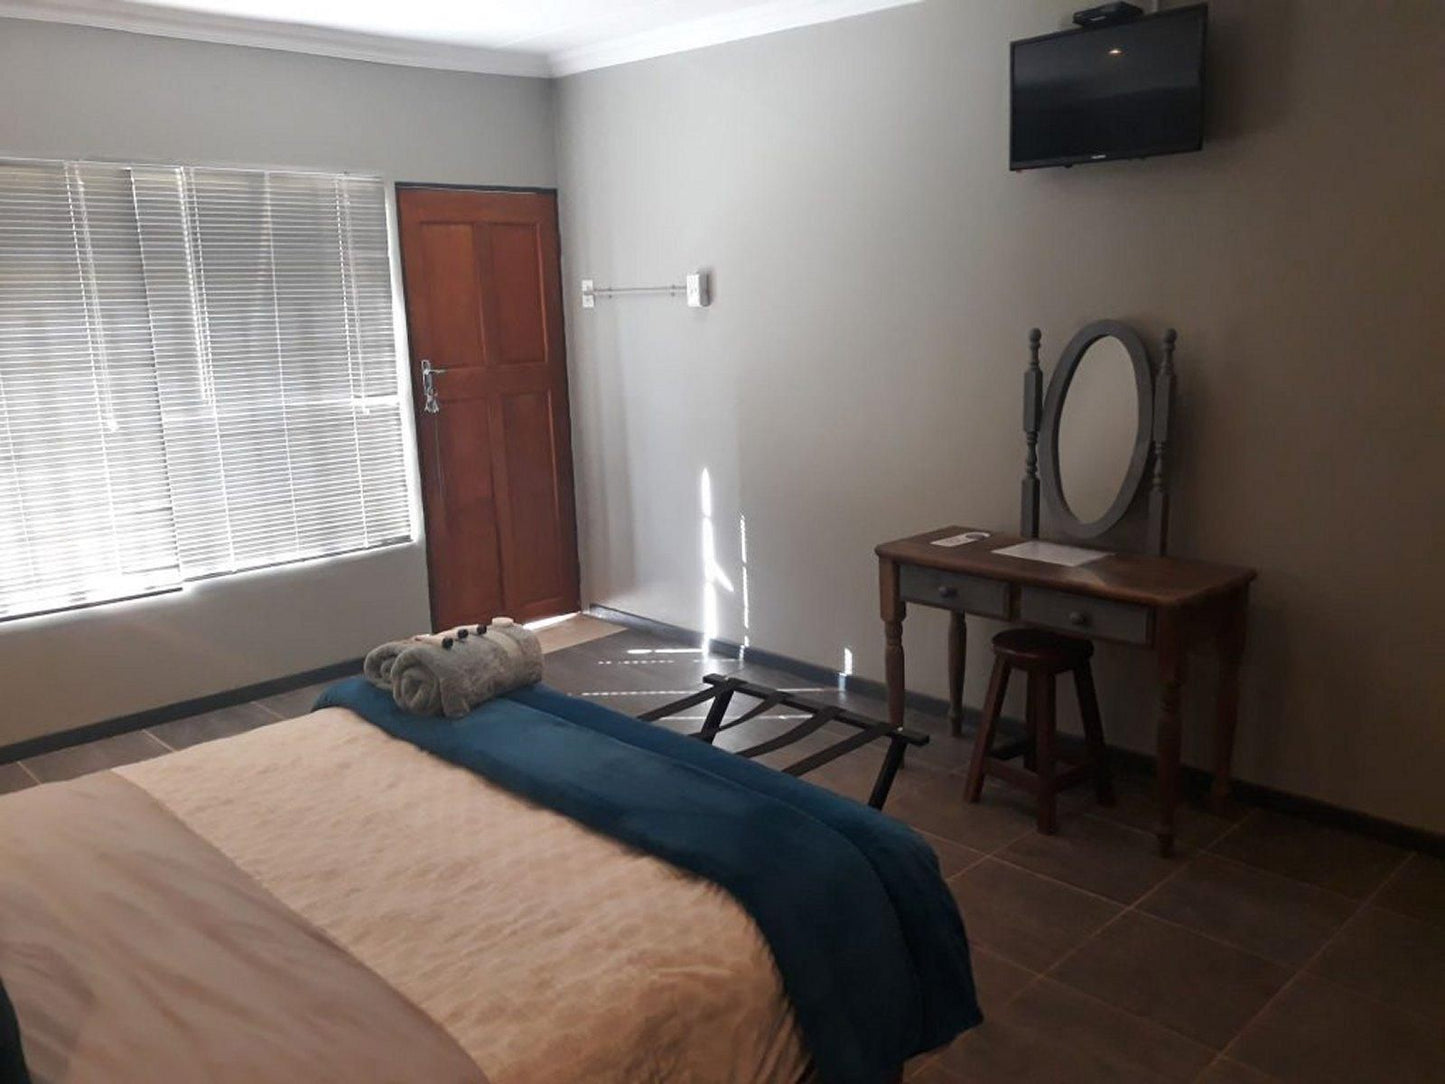 Pmg Hardware T A Wisteria Lane Guest House Postmasburg Northern Cape South Africa Bedroom